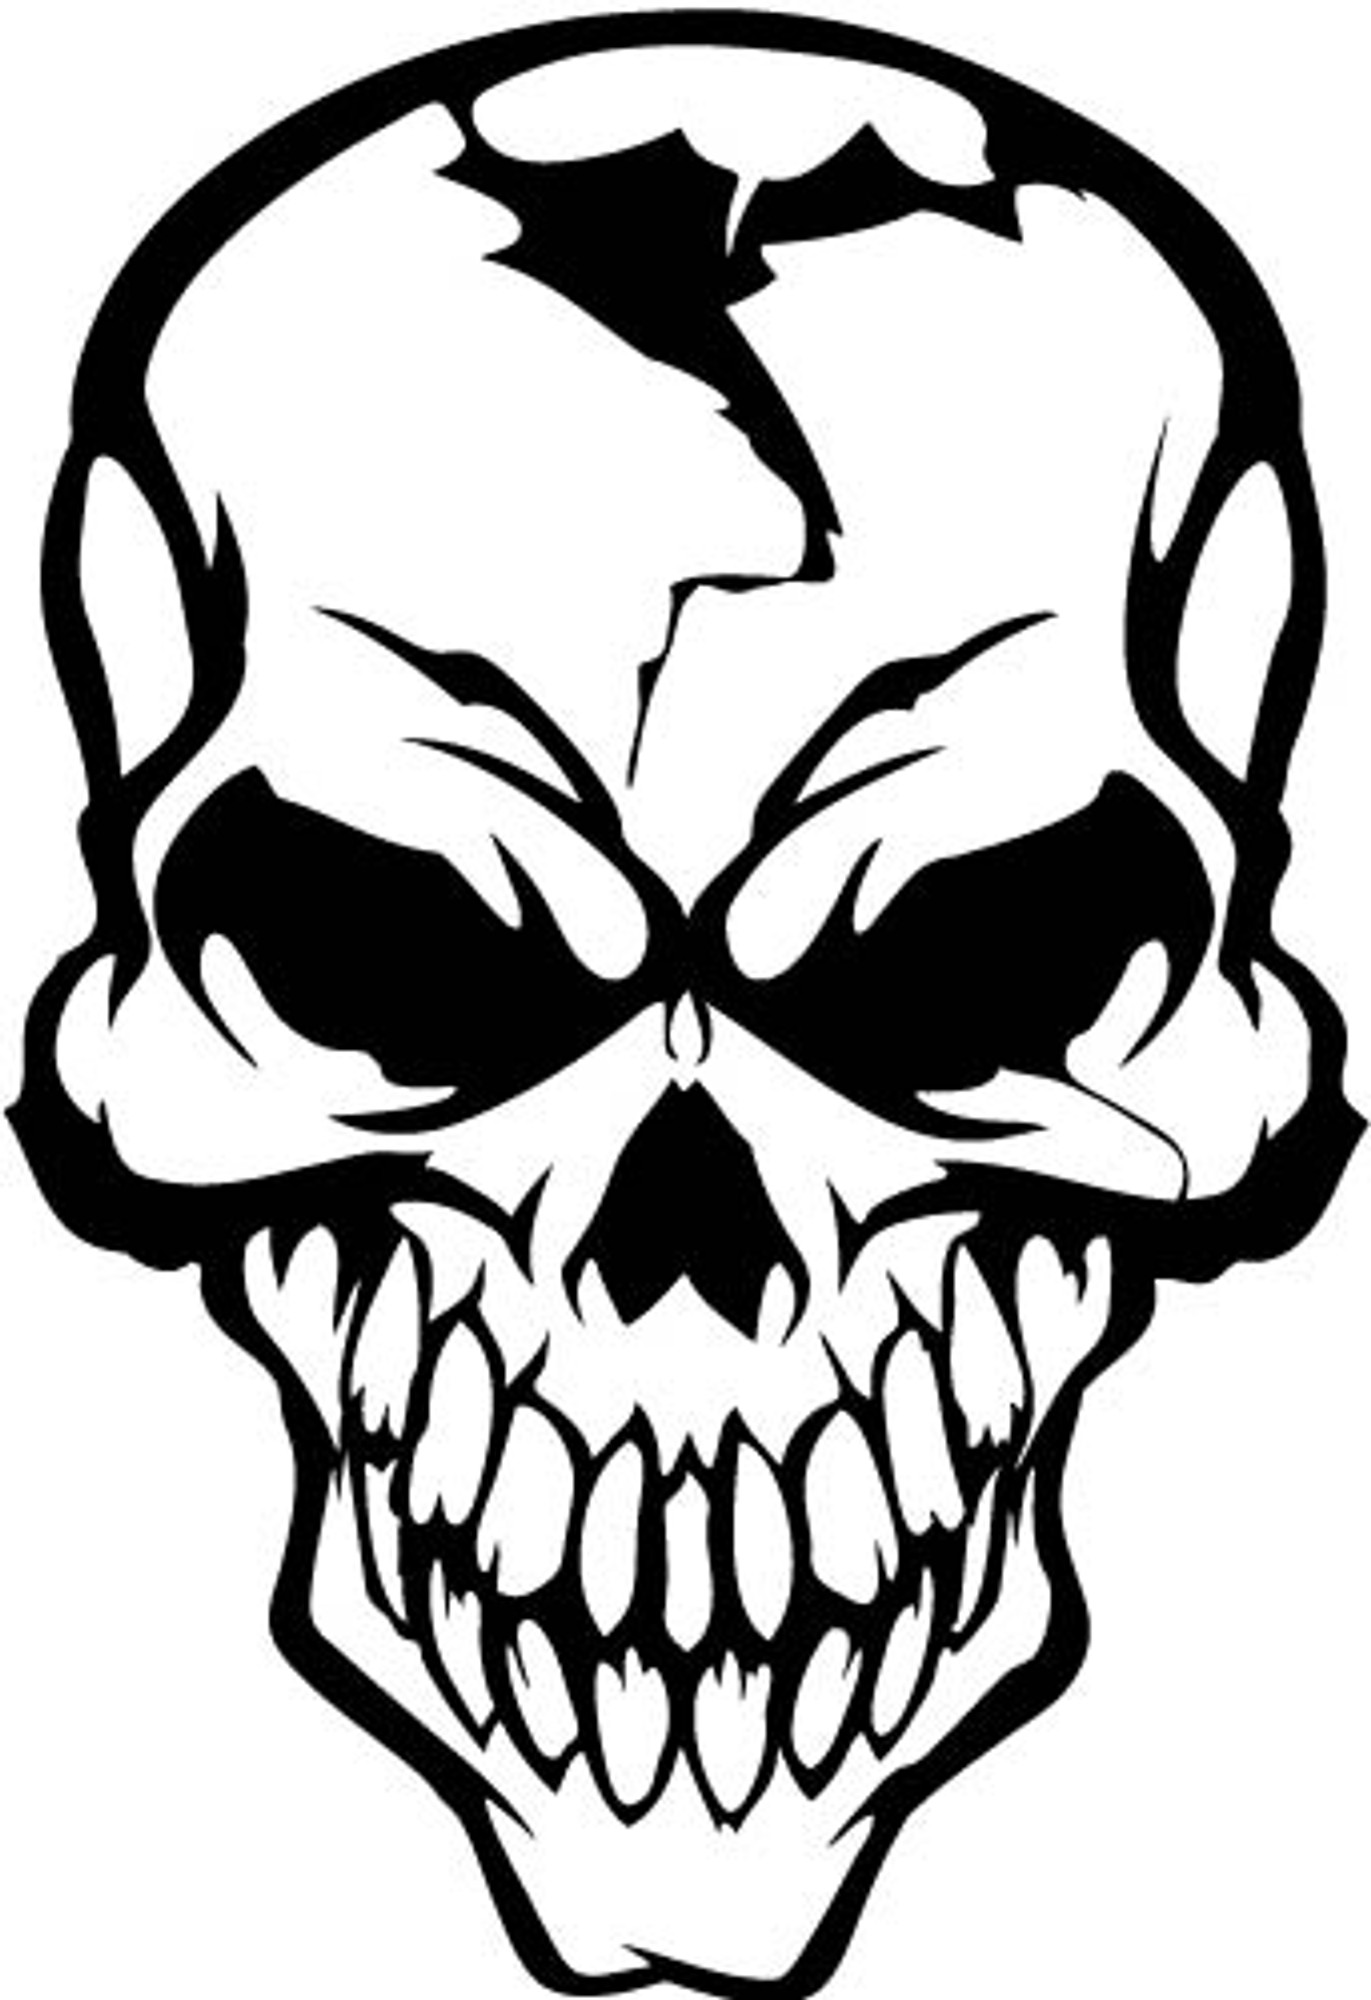 Car Decals - Car Stickers | Skull Car Decal 09 | AnyDecals.com